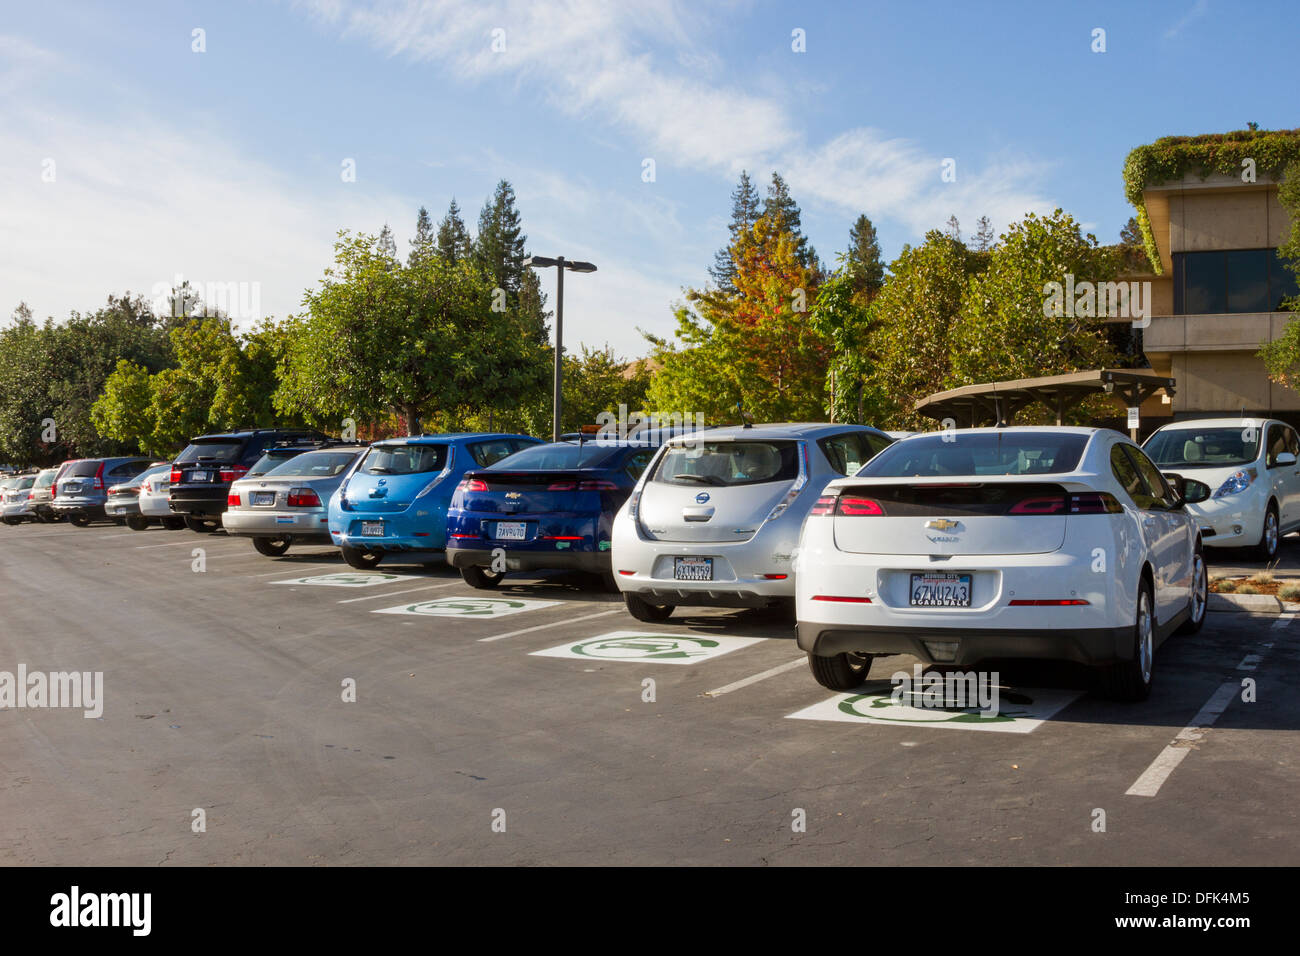 Plug-in electric cars parked in parking spaces reserved for EV cars at a company parking lot Stock Photo